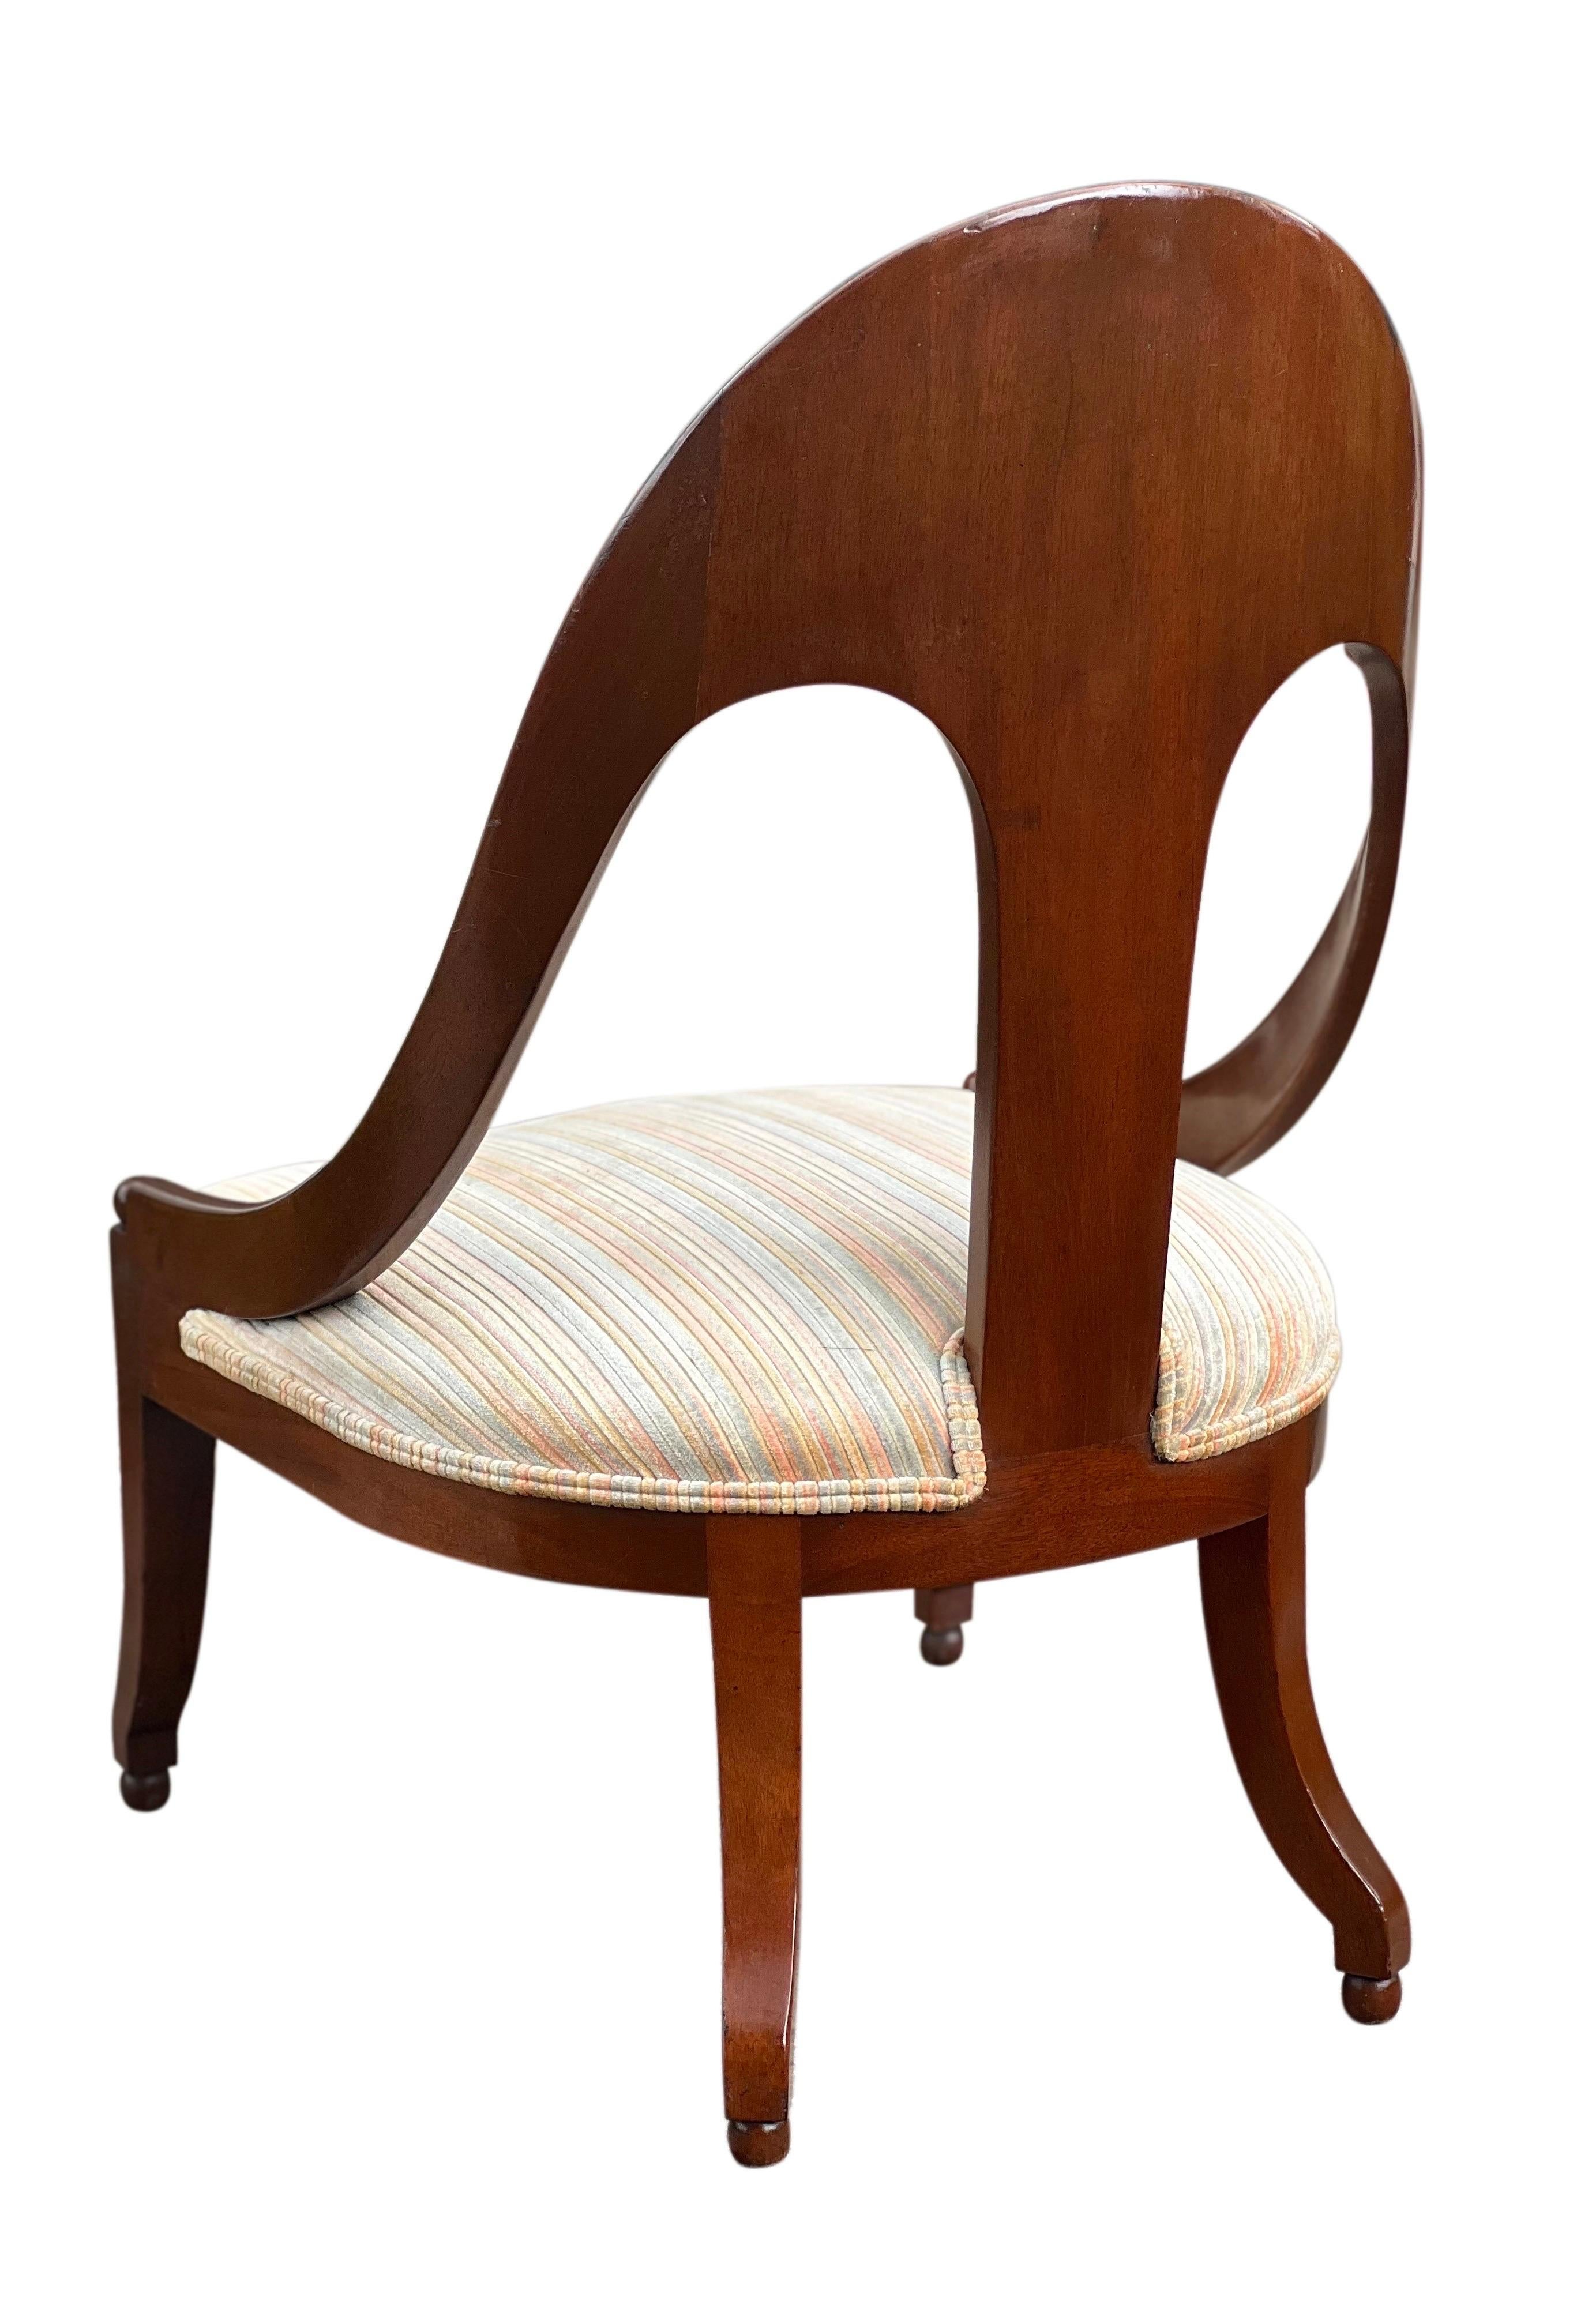 20th Century Mid Century Mahogany Slipper Lounge Chair Attributed to Michael Taylor for Baker For Sale